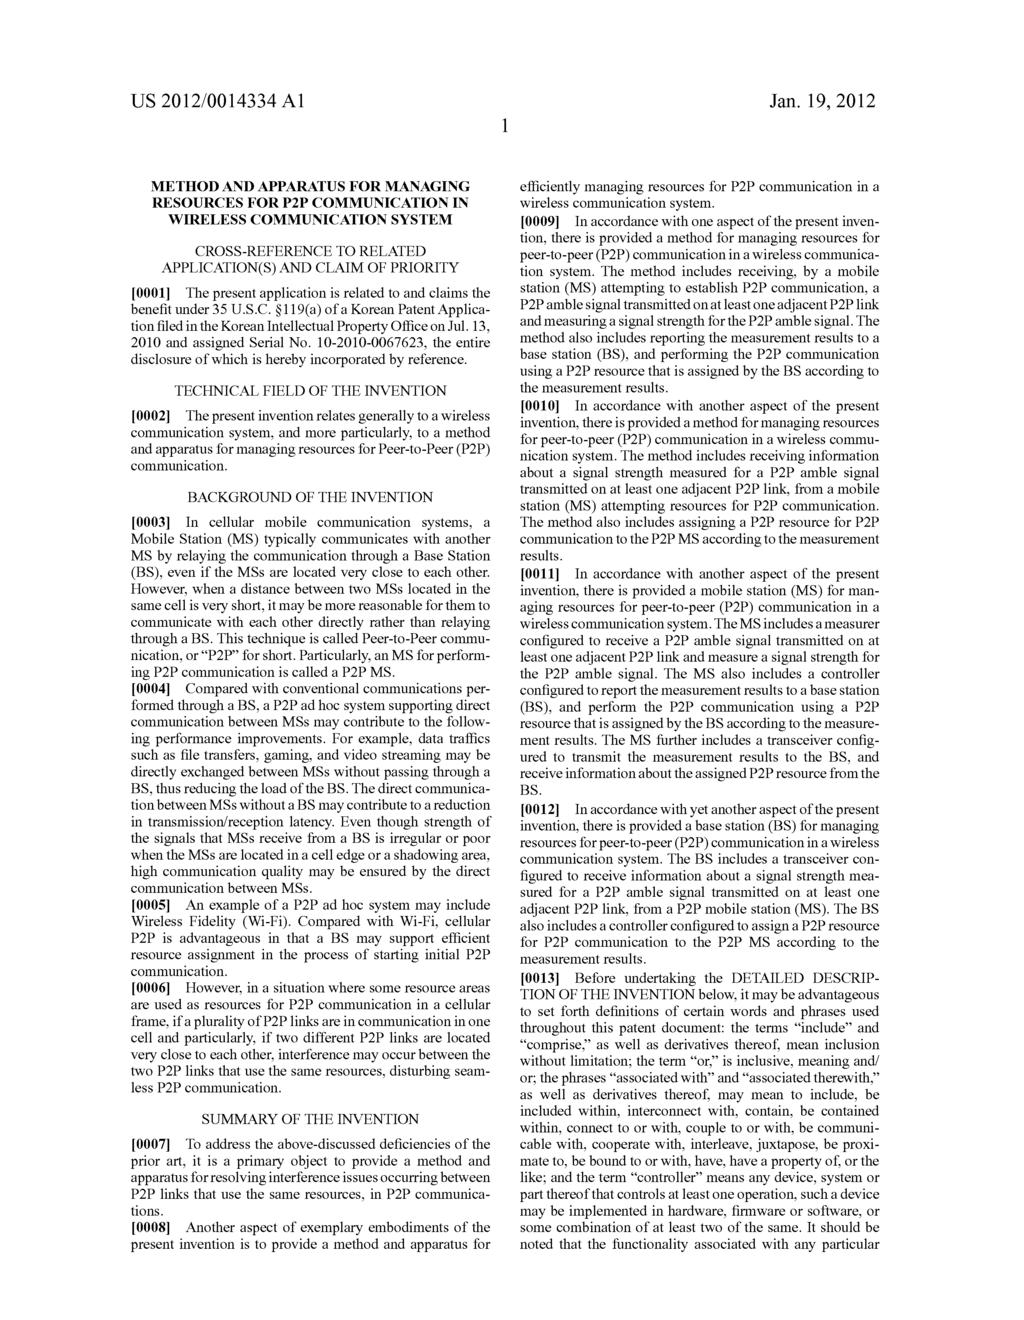 US 2012/0014334 A1 Jan. 19, 2012 METHOD AND APPARATUS FOR MANAGING RESOURCES FOR P2P COMMUNICATION IN WRELESS COMMUNICATION SYSTEM CROSS-REFERENCE TO RELATED APPLICATION(S) AND CLAIM OF PRIORITY 0001.